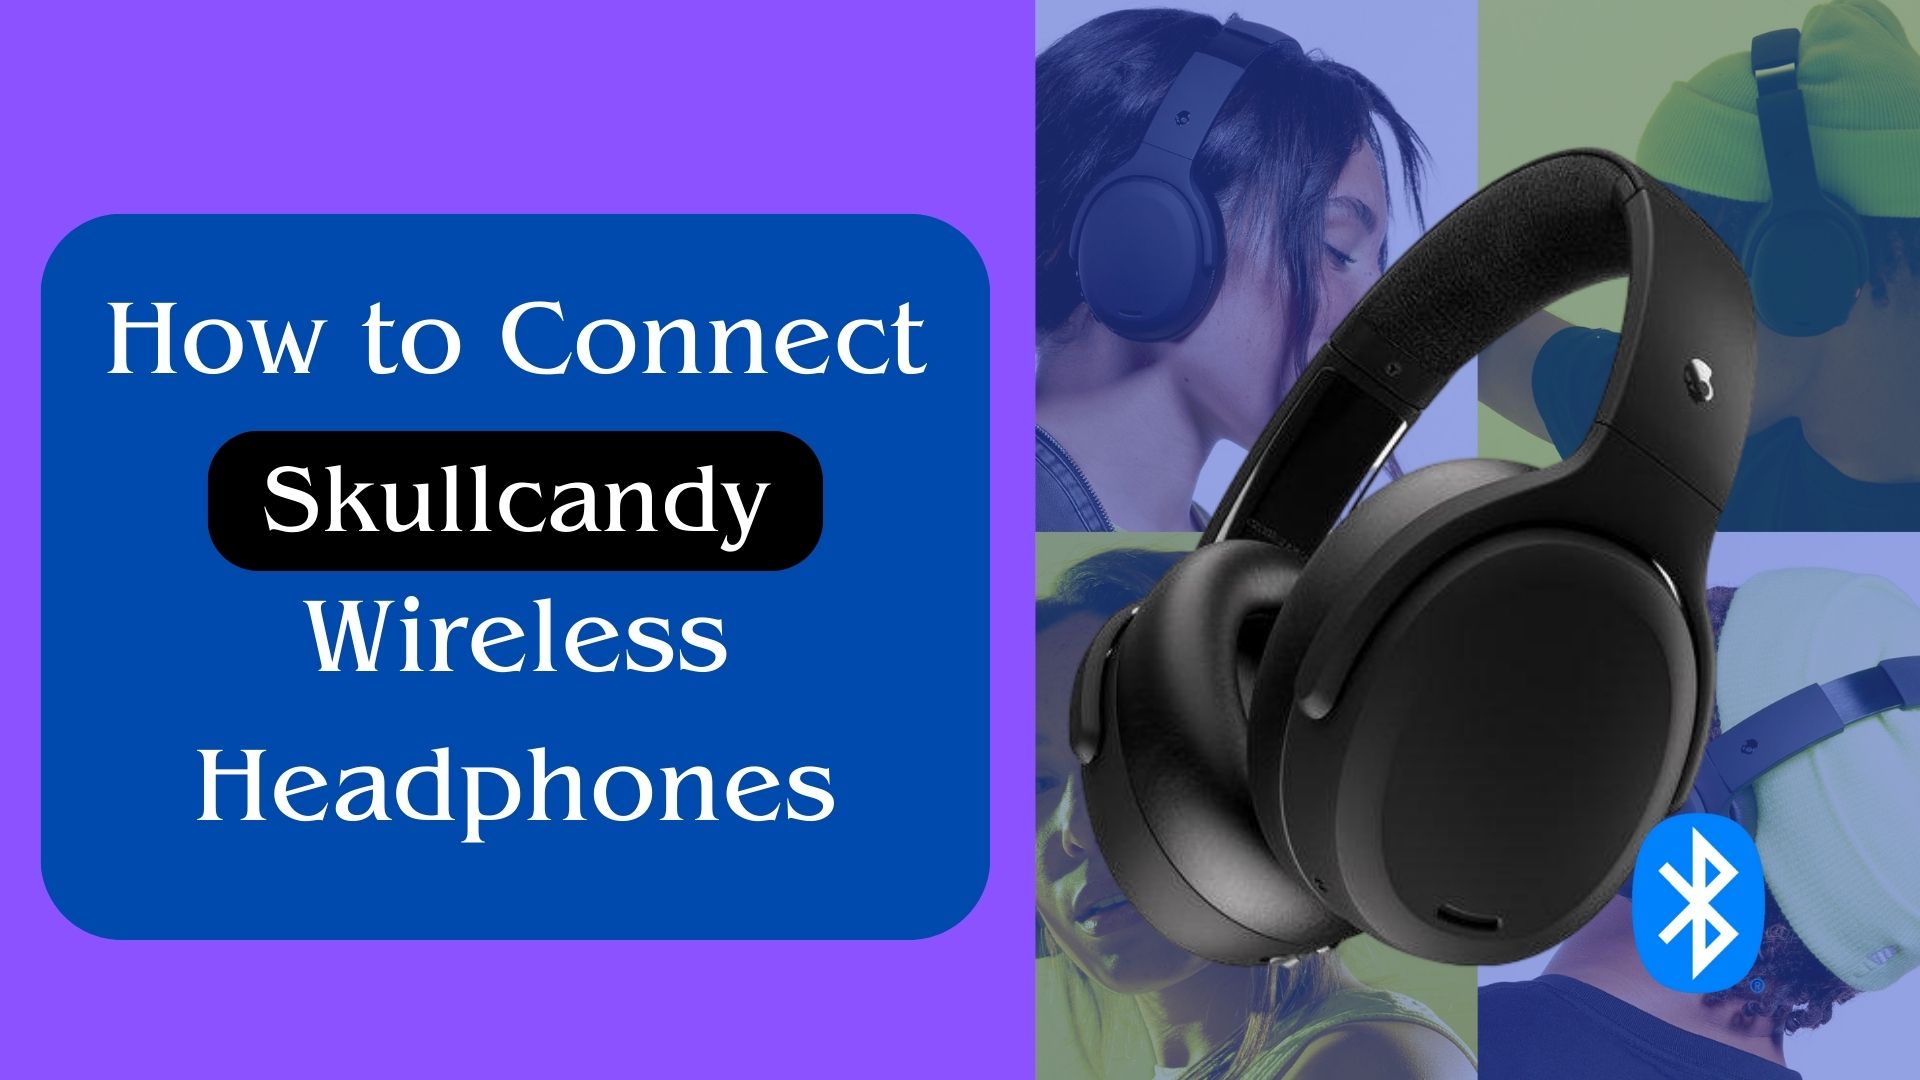 How to Connect Skullcandy Wireless Headphones to iPhone, Mac, Android & Windows PC